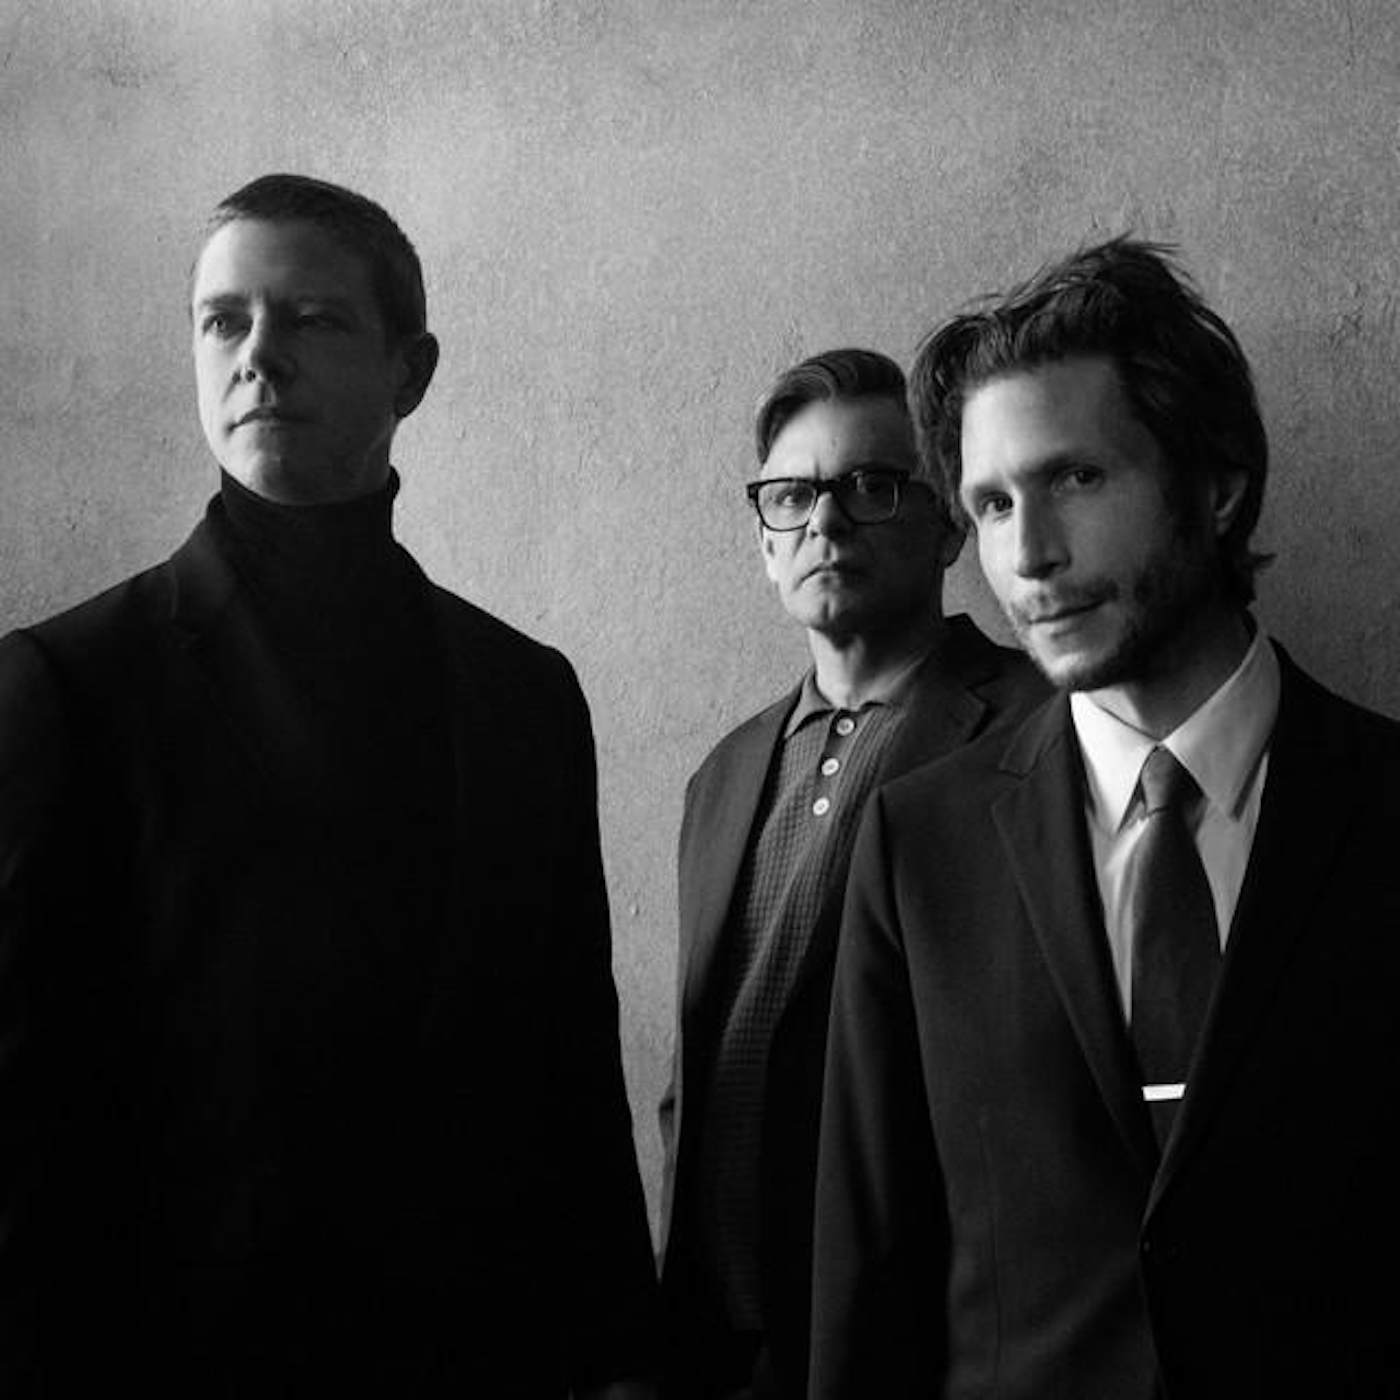 Interpol The Other Side Of Make Believe